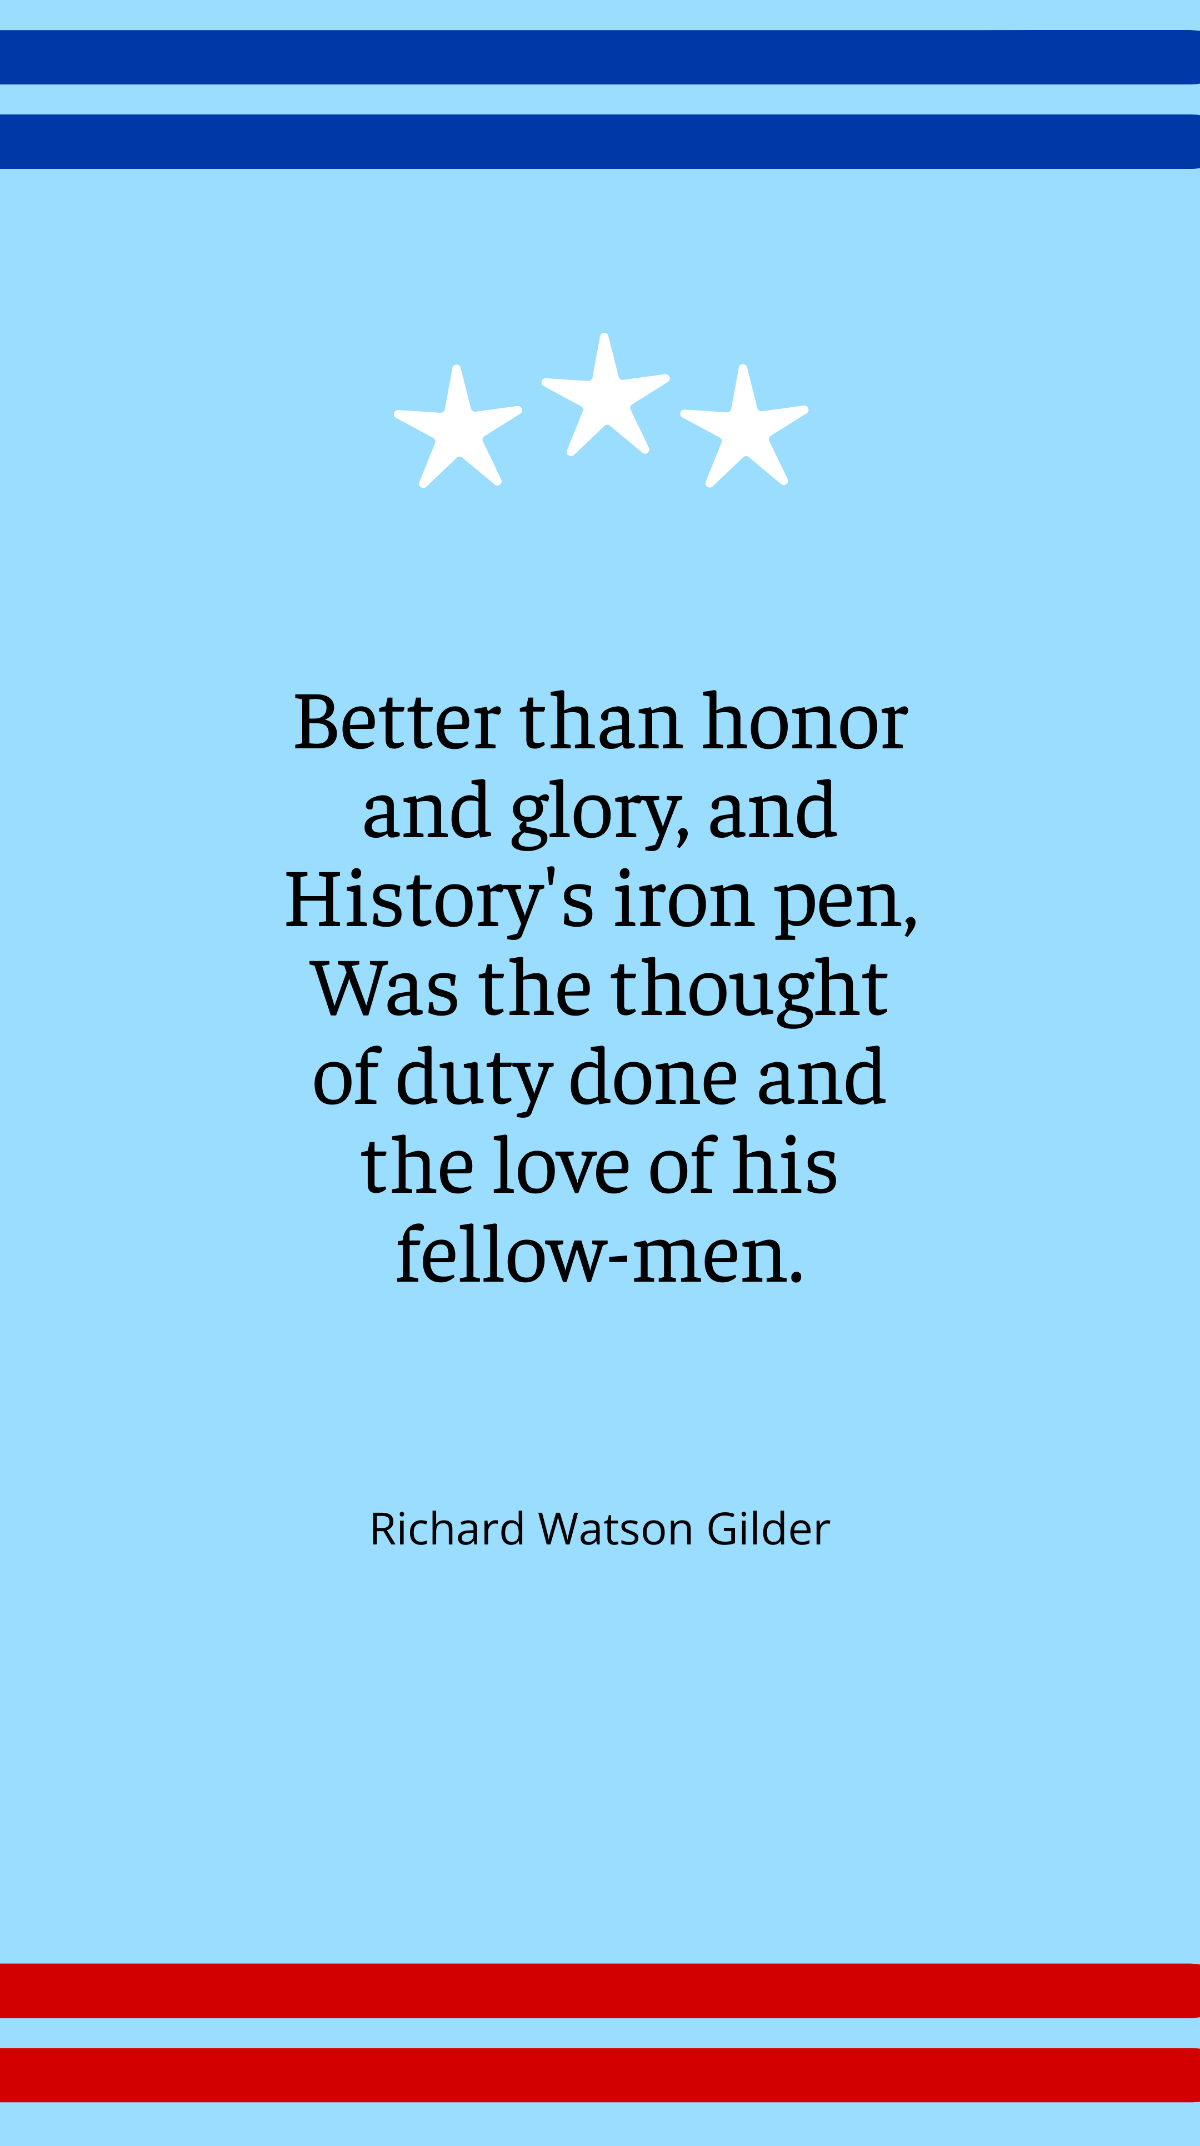 Free Richard Watson Gilder - Better than honor and glory, and History's iron pen, Was the thought of duty done and the love of his fellow-men. Template